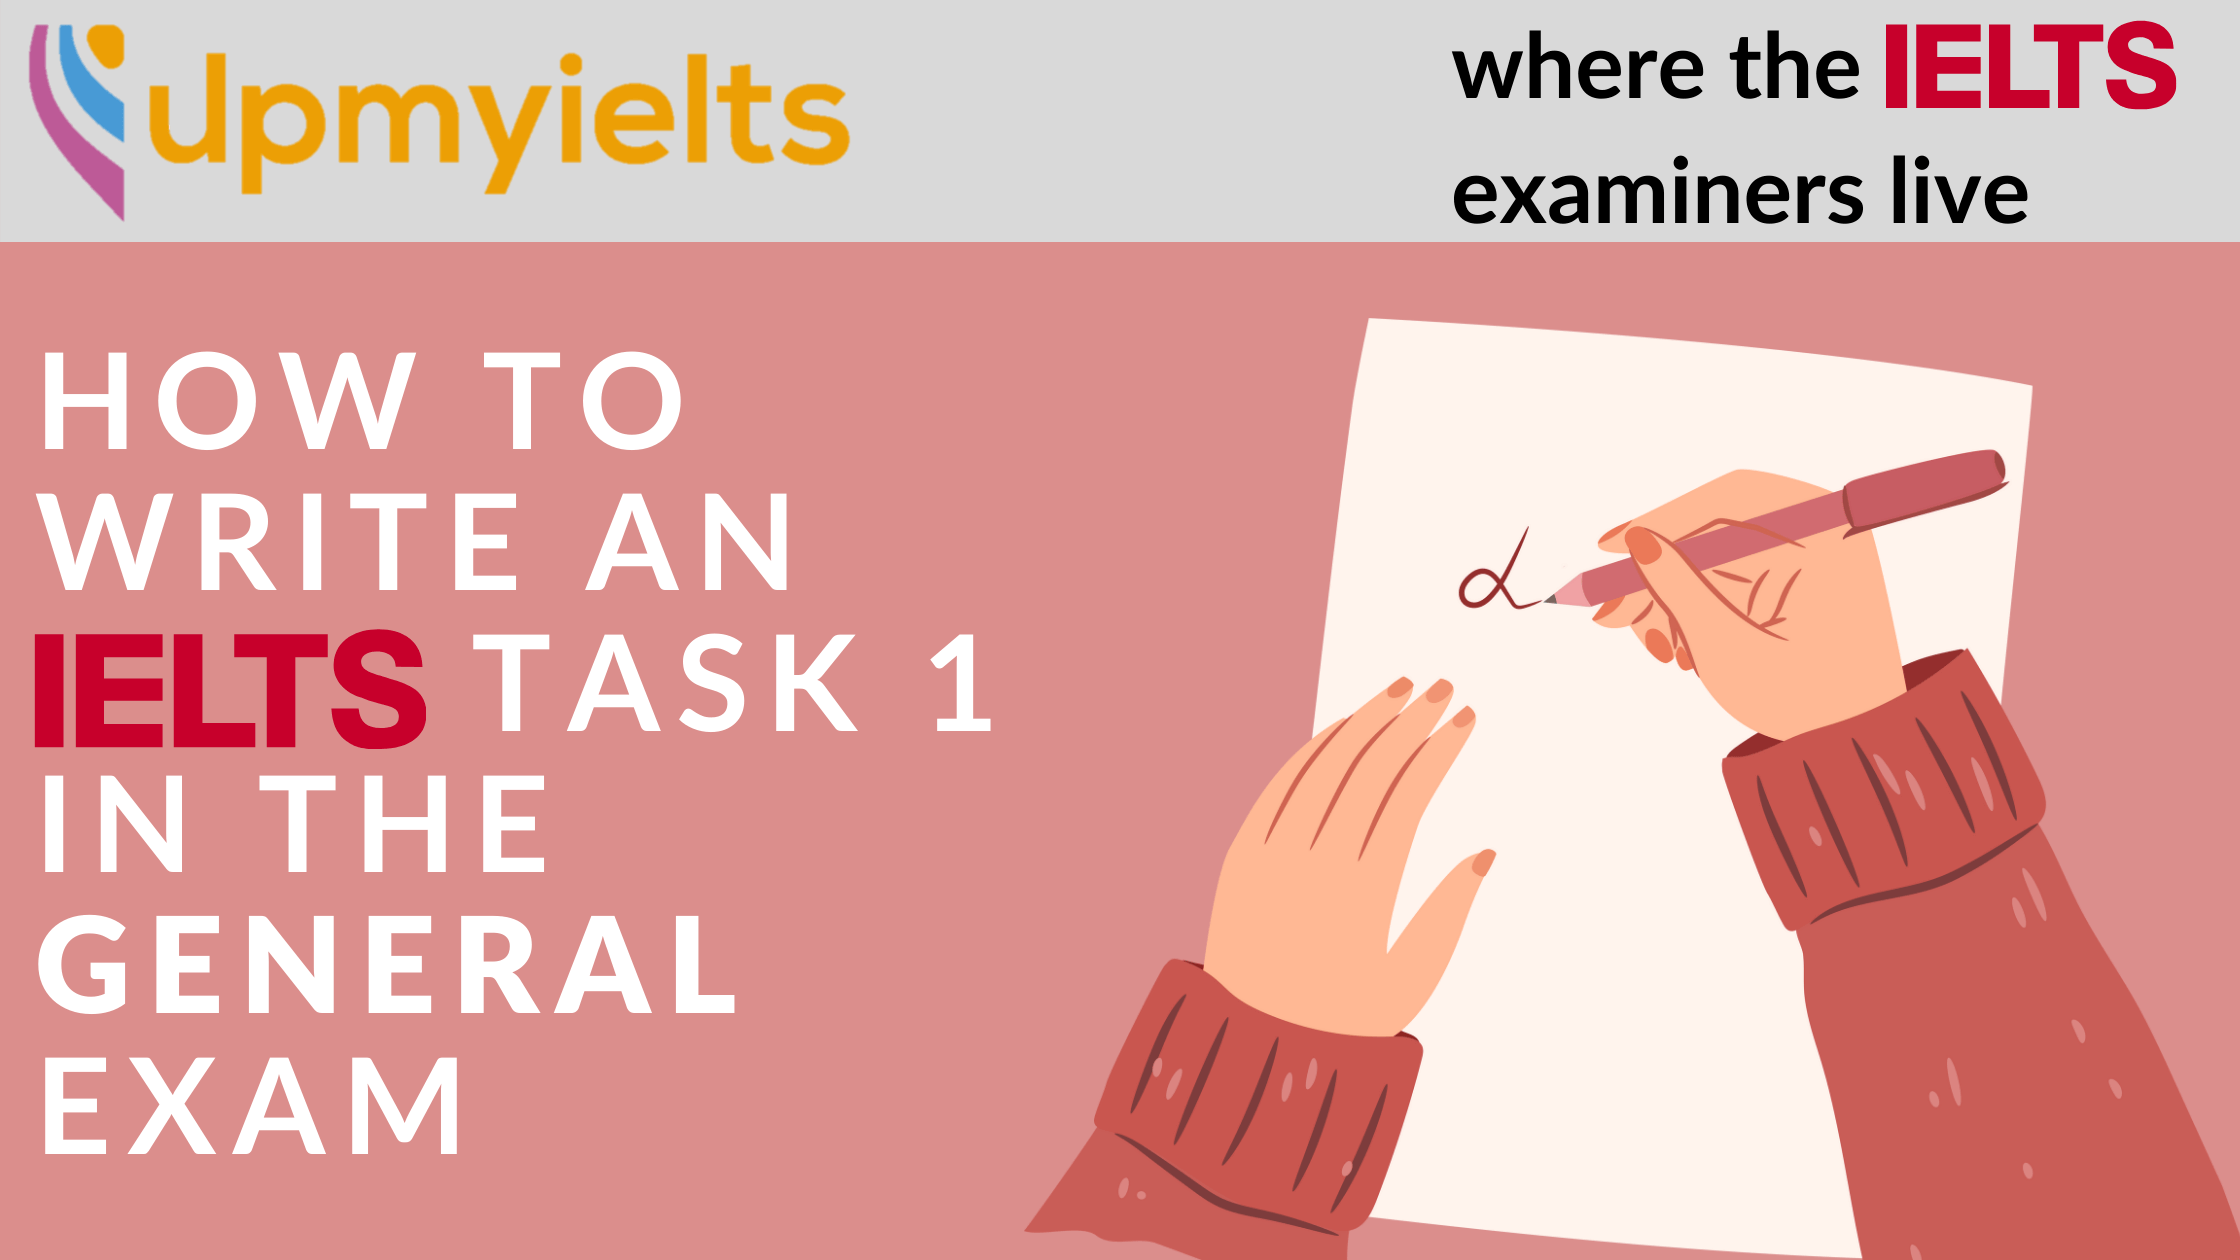 How to write IELTS Task 1